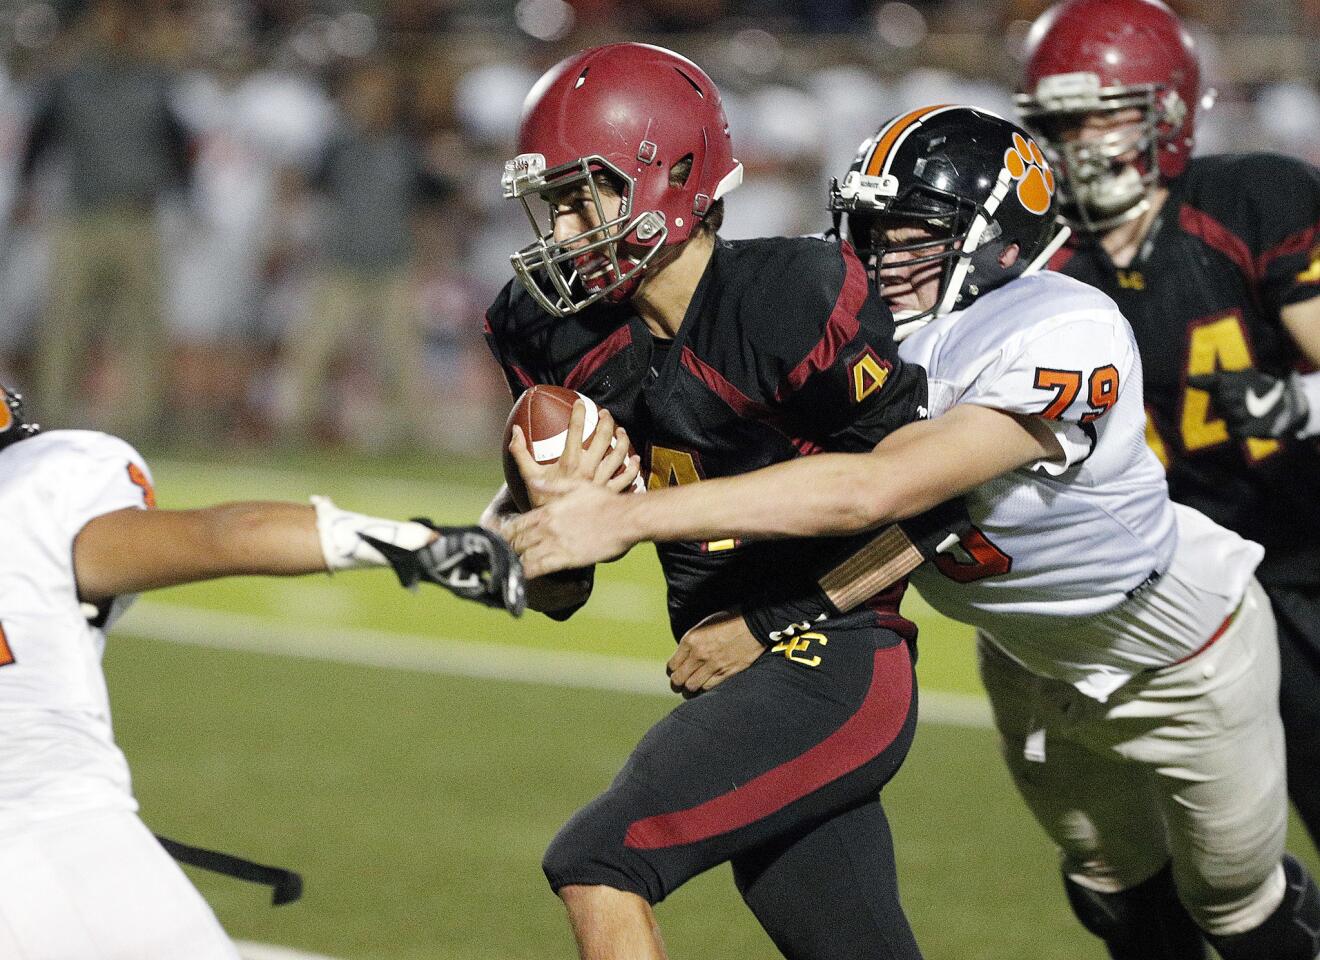 La Canada's quarterback Matt Bromley carries the ball on a quarterback sneak with South Pasadena's Jove Yates wrapping his arms around him in a Rio Hondo League football game at La Canada High School on Friday, October 19, 2018. It was the homecoming football game.